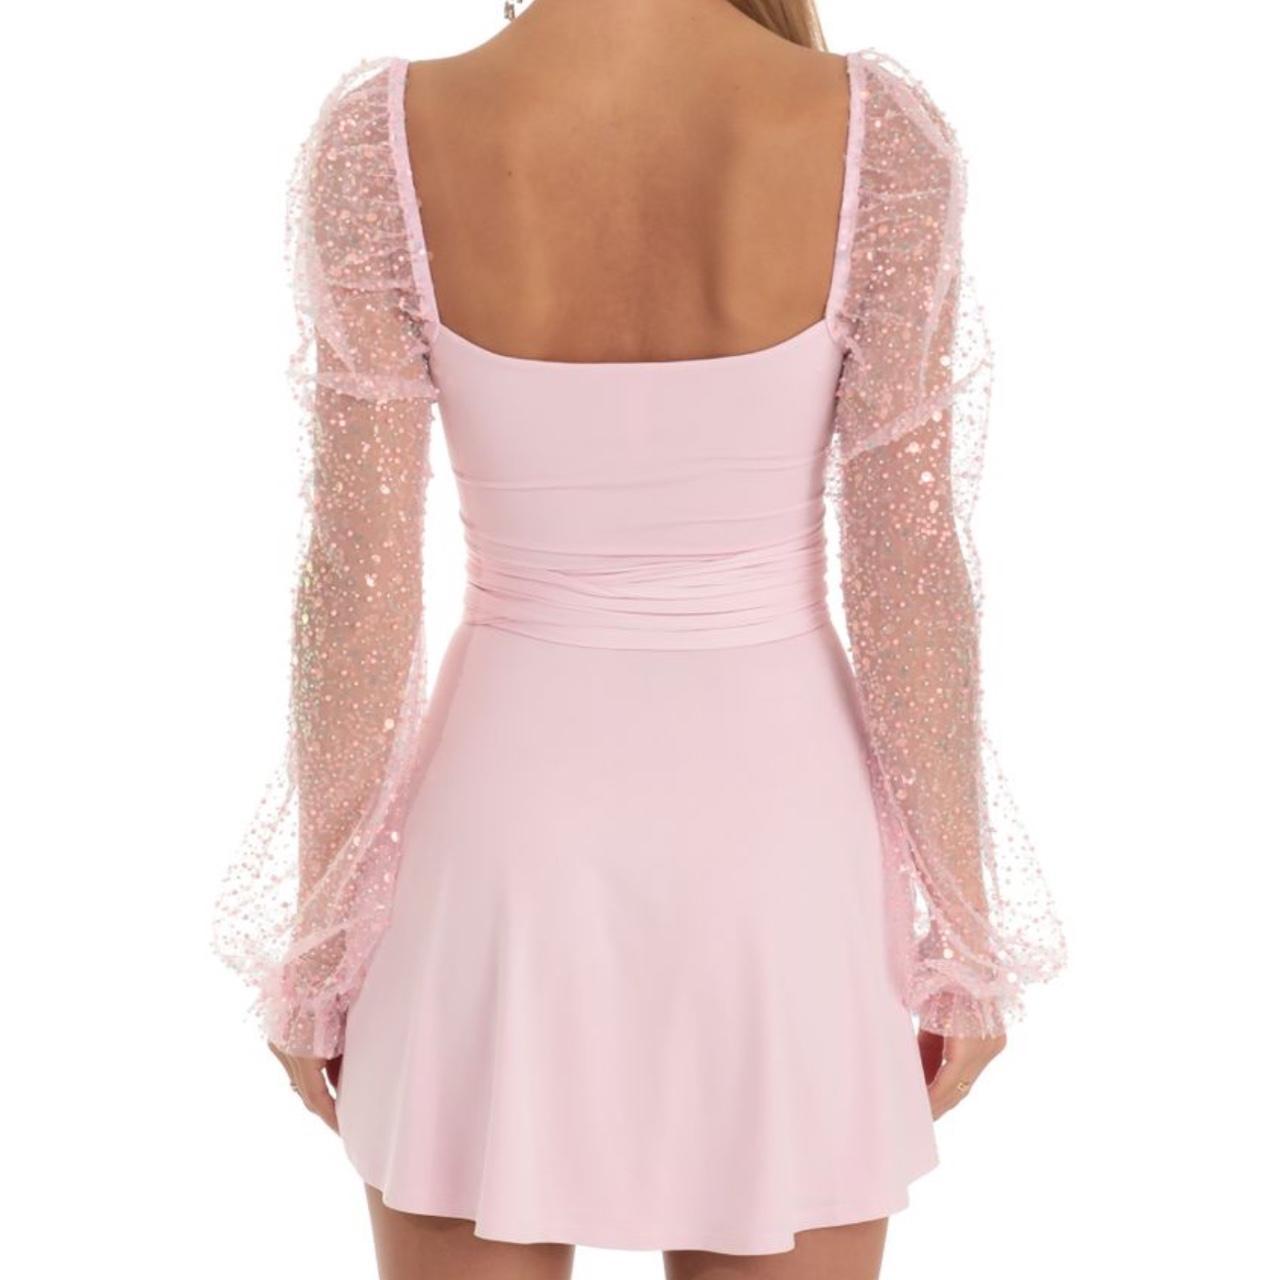 Lucy in the Sky Women's Pink Dress (3)